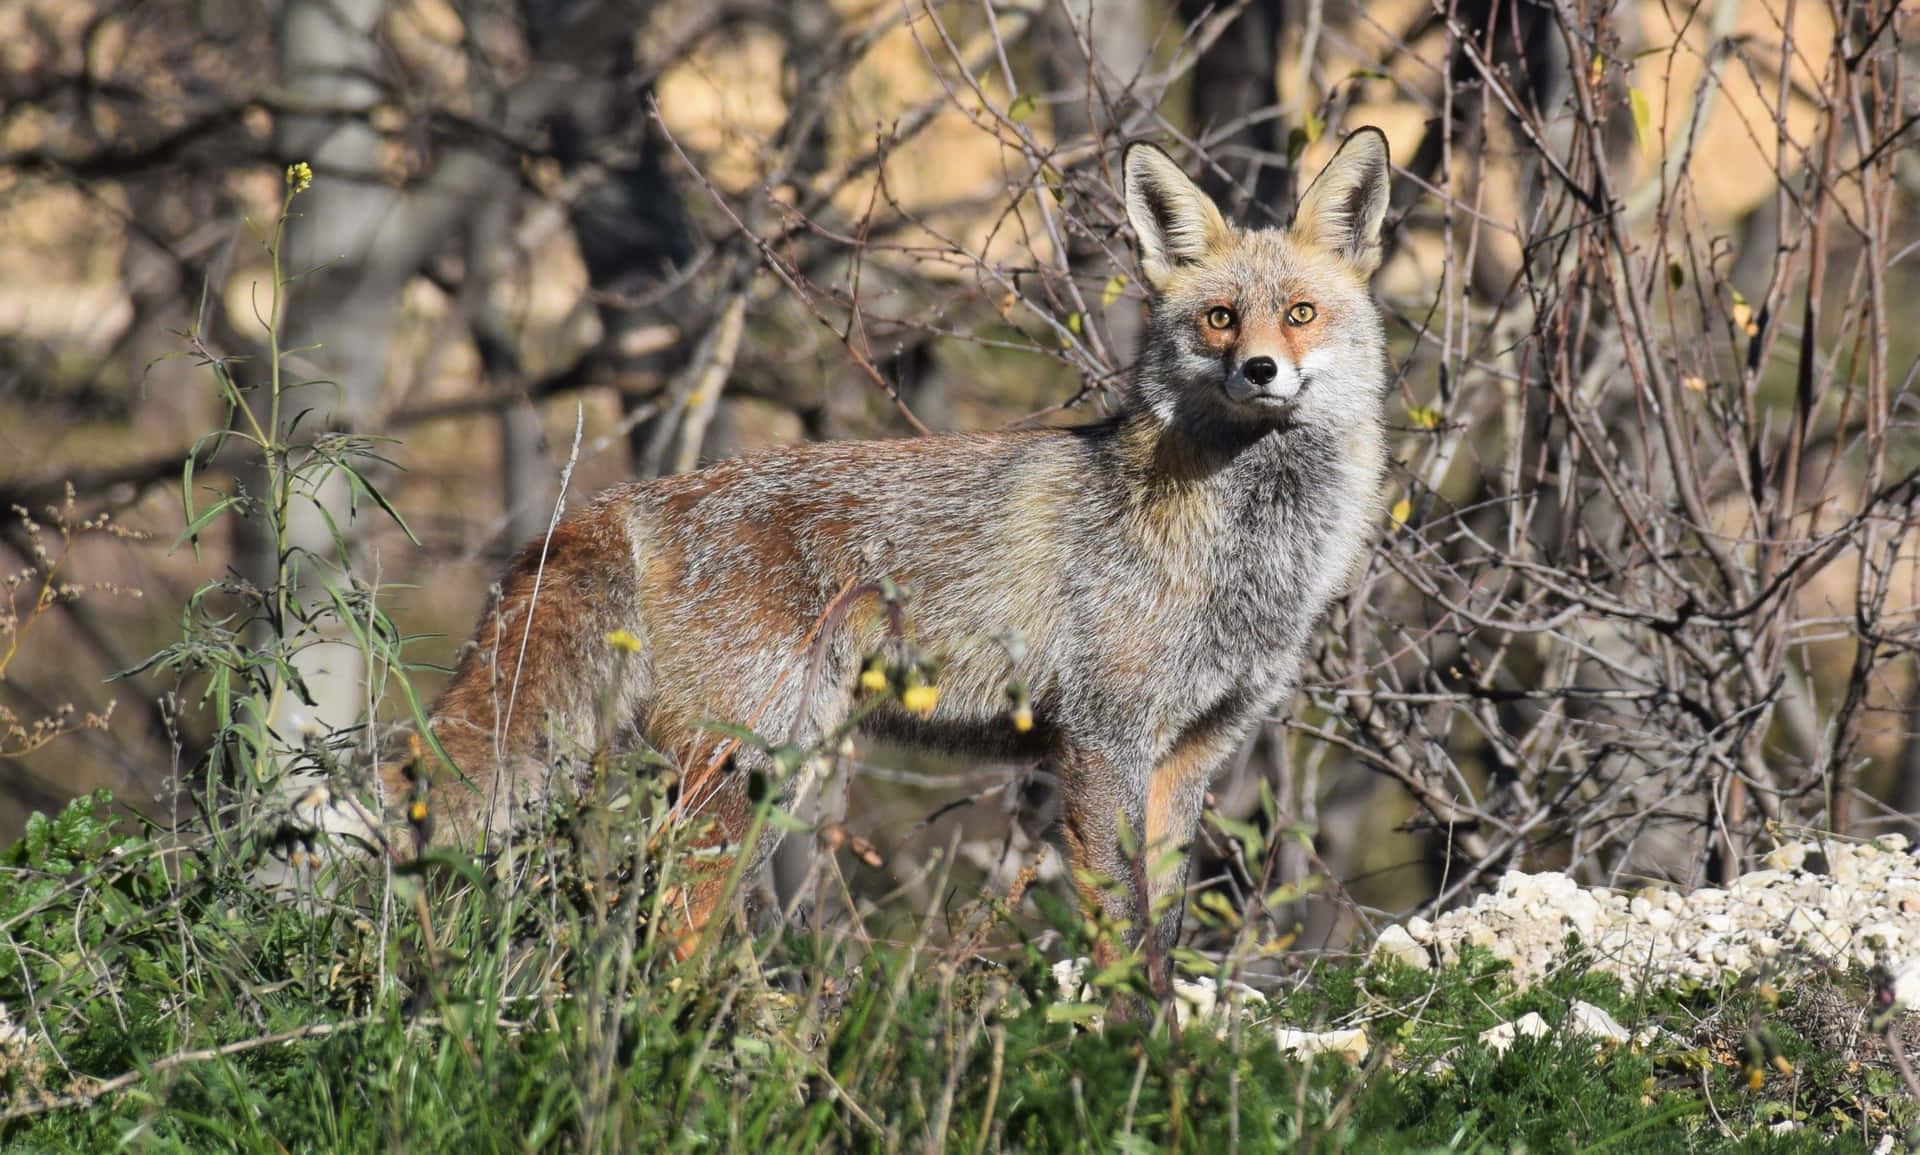 A Gray Fox emerging from a thicket of shrubs and foliage